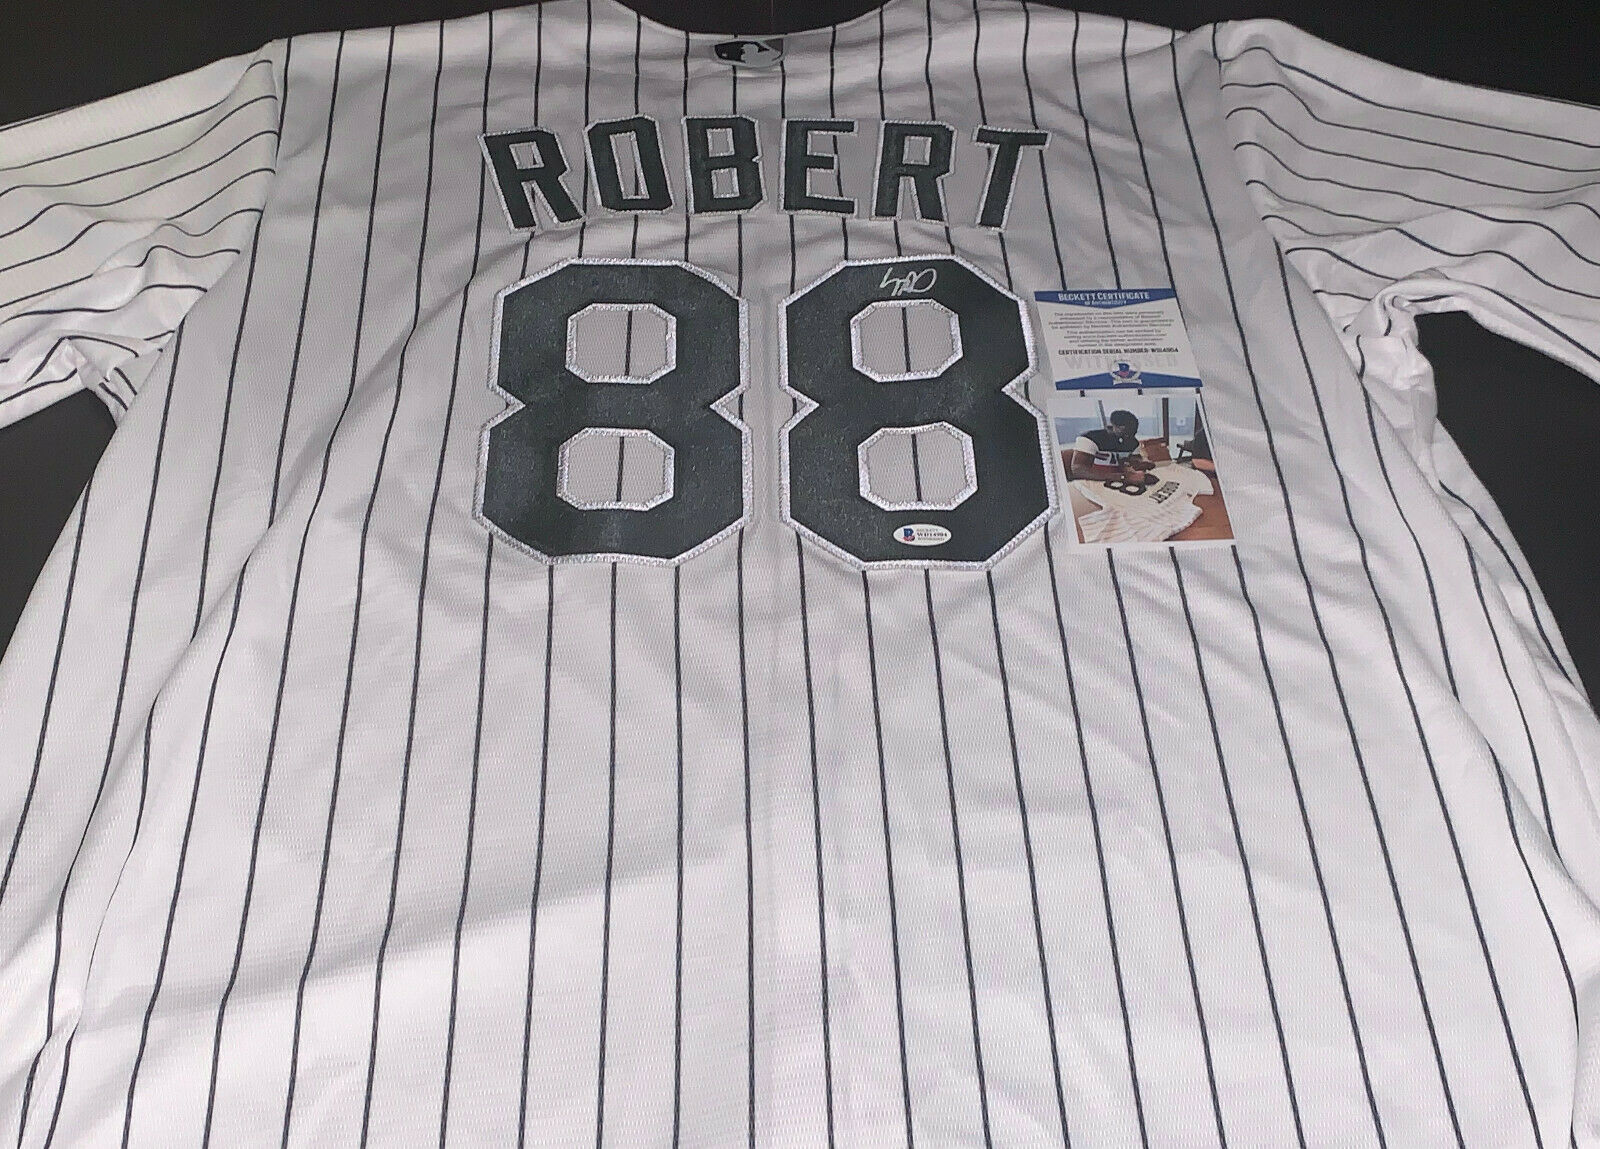 Luis Robert White Sox Autographed Signed NIKE Jersey Beckett WITNESS C —  SidsGraphs